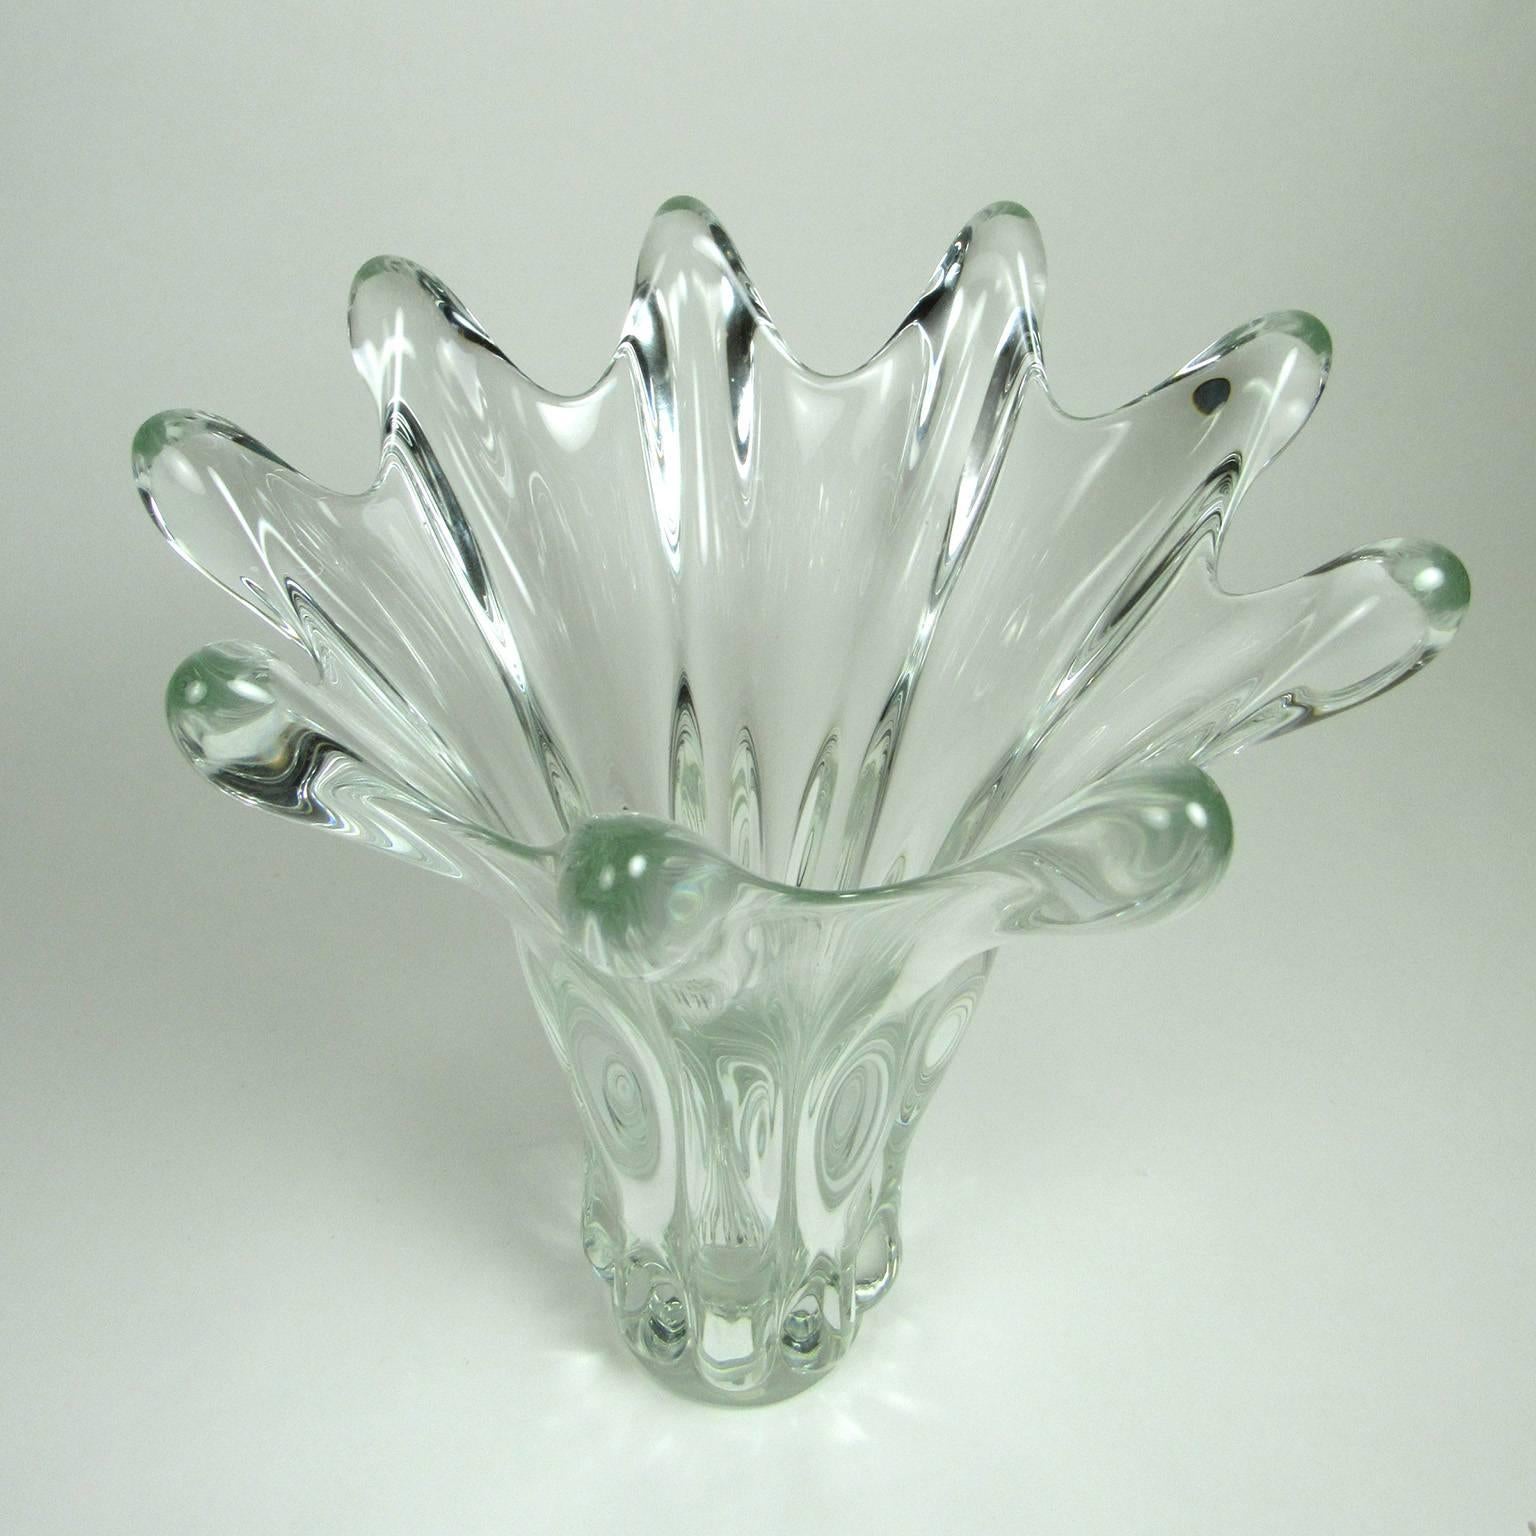 Impressive tall French Cristallenes de Vannes floriform crystal vase, mid-20th century. Bears acid etched Art Vannes France mark on bottom. Measures: Height 16 inches, diameter 12 inches.